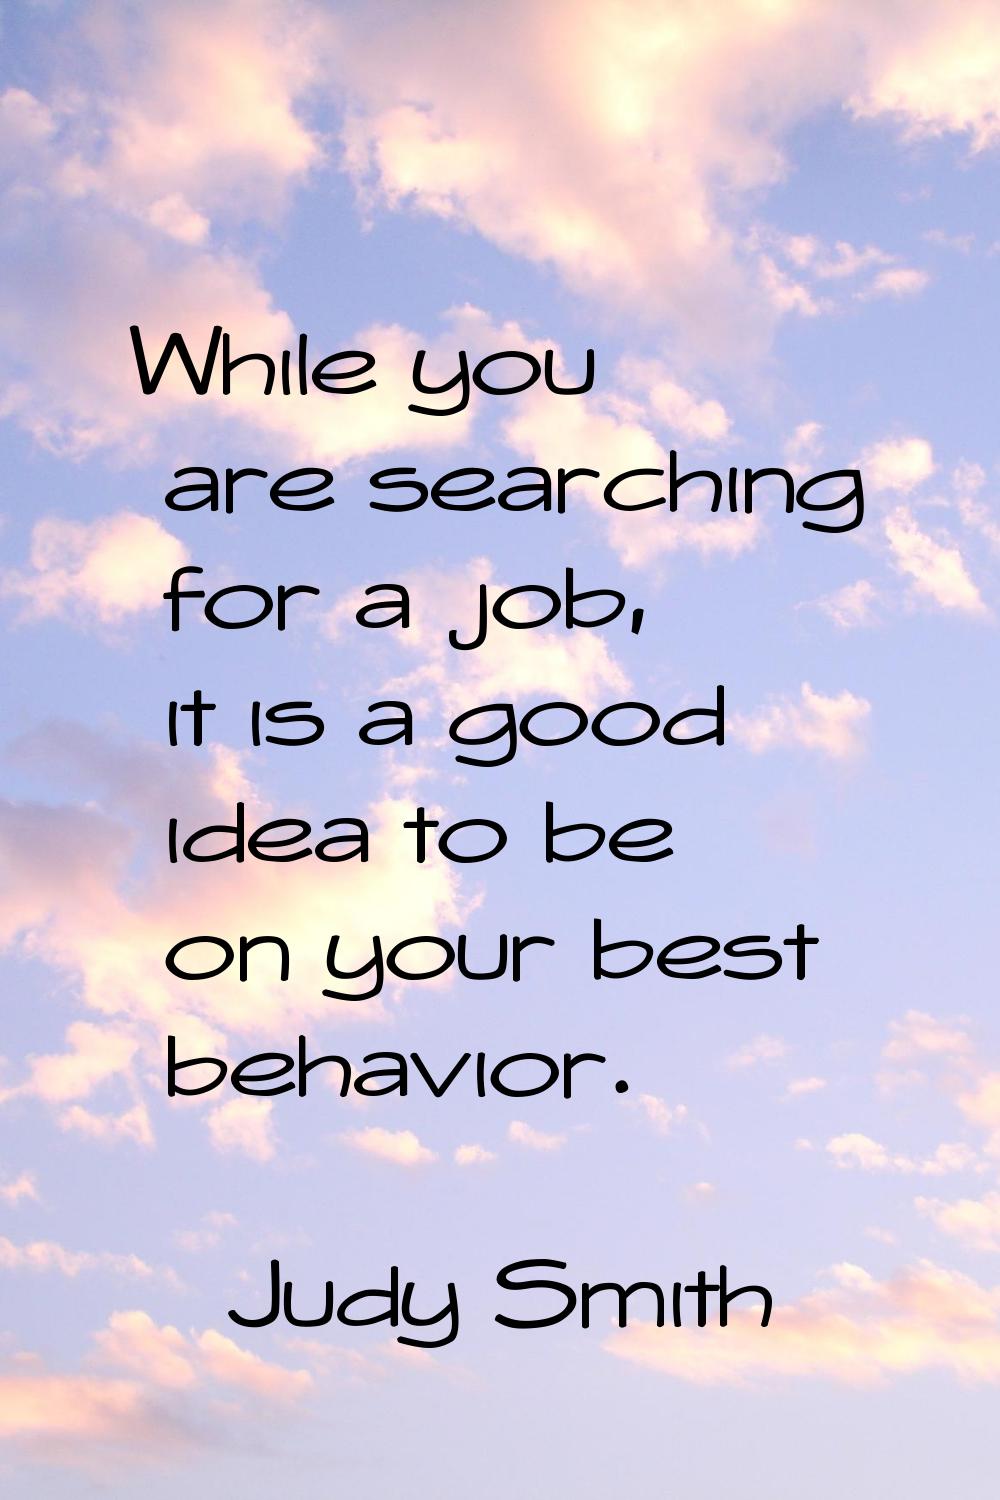 While you are searching for a job, it is a good idea to be on your best behavior.